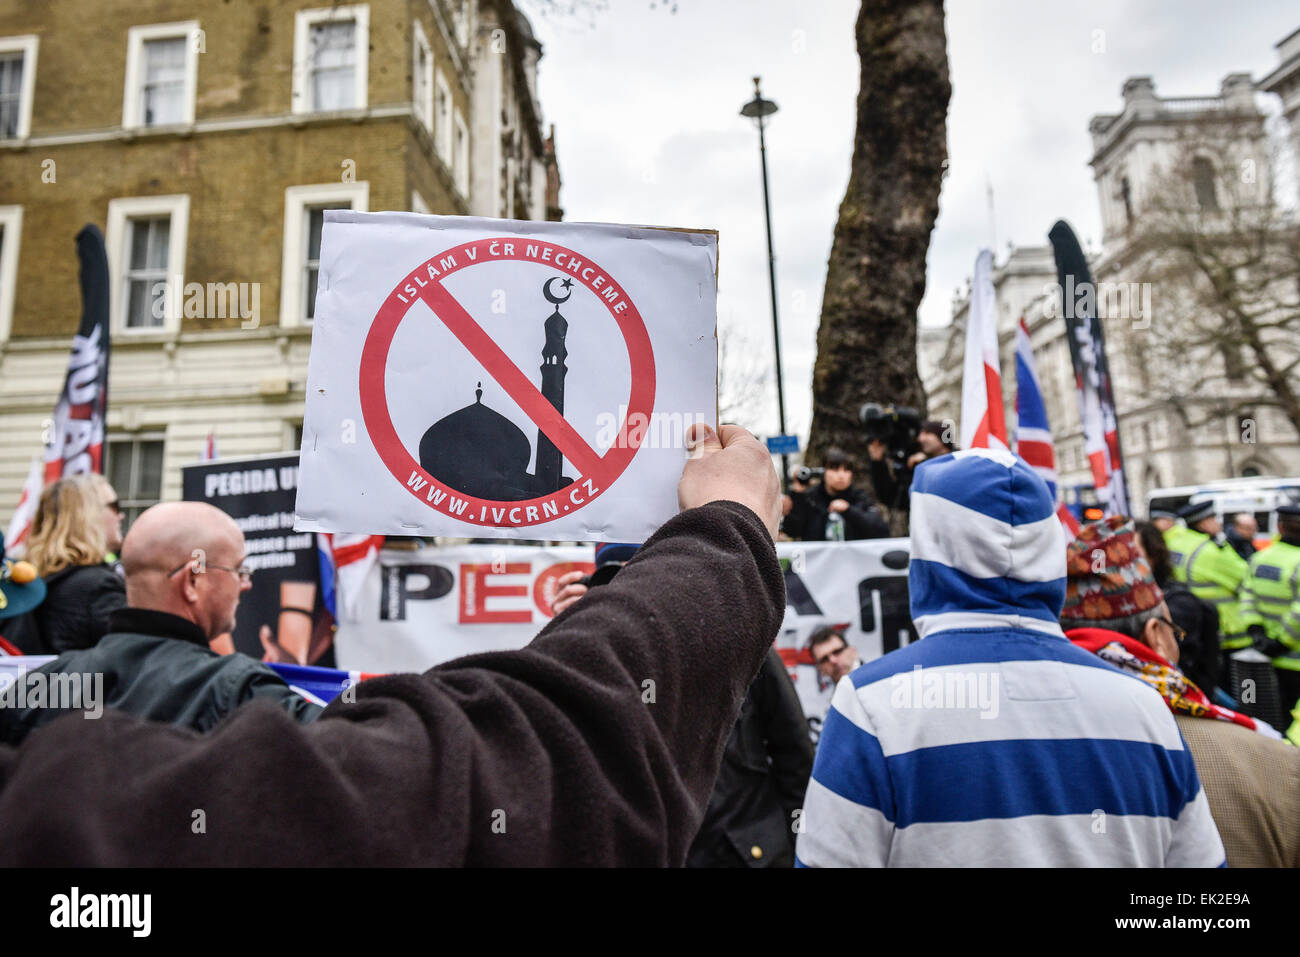 Pergida supporters demonstrating in Whitehall in London. Stock Photo